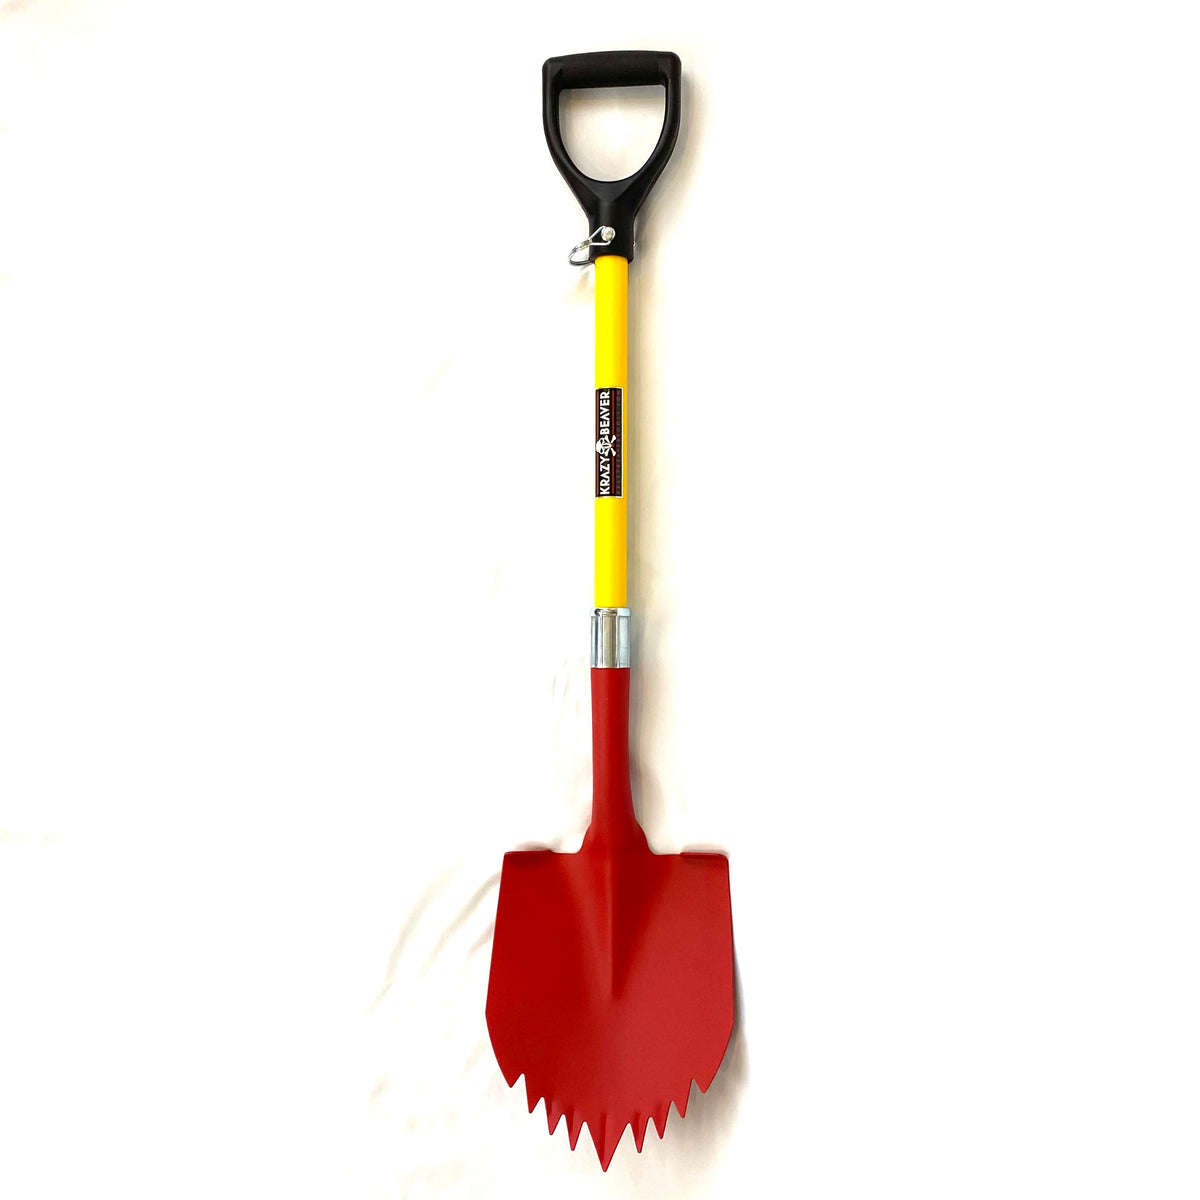 Krazy Beaver Shovel (Textured Red Head / Yellow Handle 45637)  Recovery Gear, Camping gear, Shovel, Camping Krazy Beaver Tools- Adventure Imports